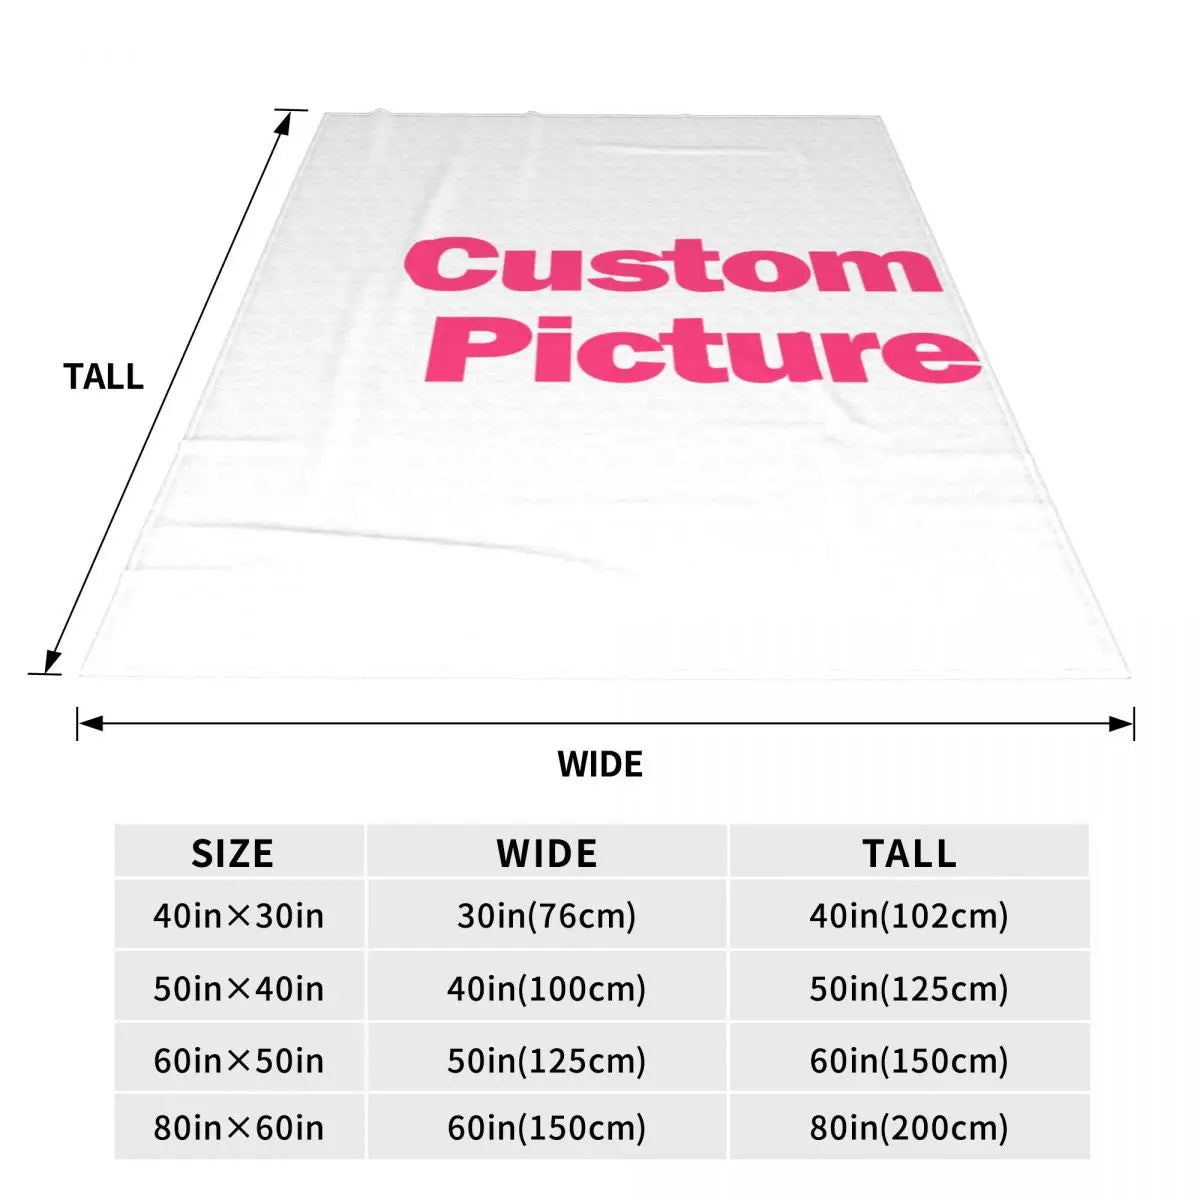 custom picture blanket custom blankets with pictures customized photo blankets custom blanket with picture custom blanket with pictures